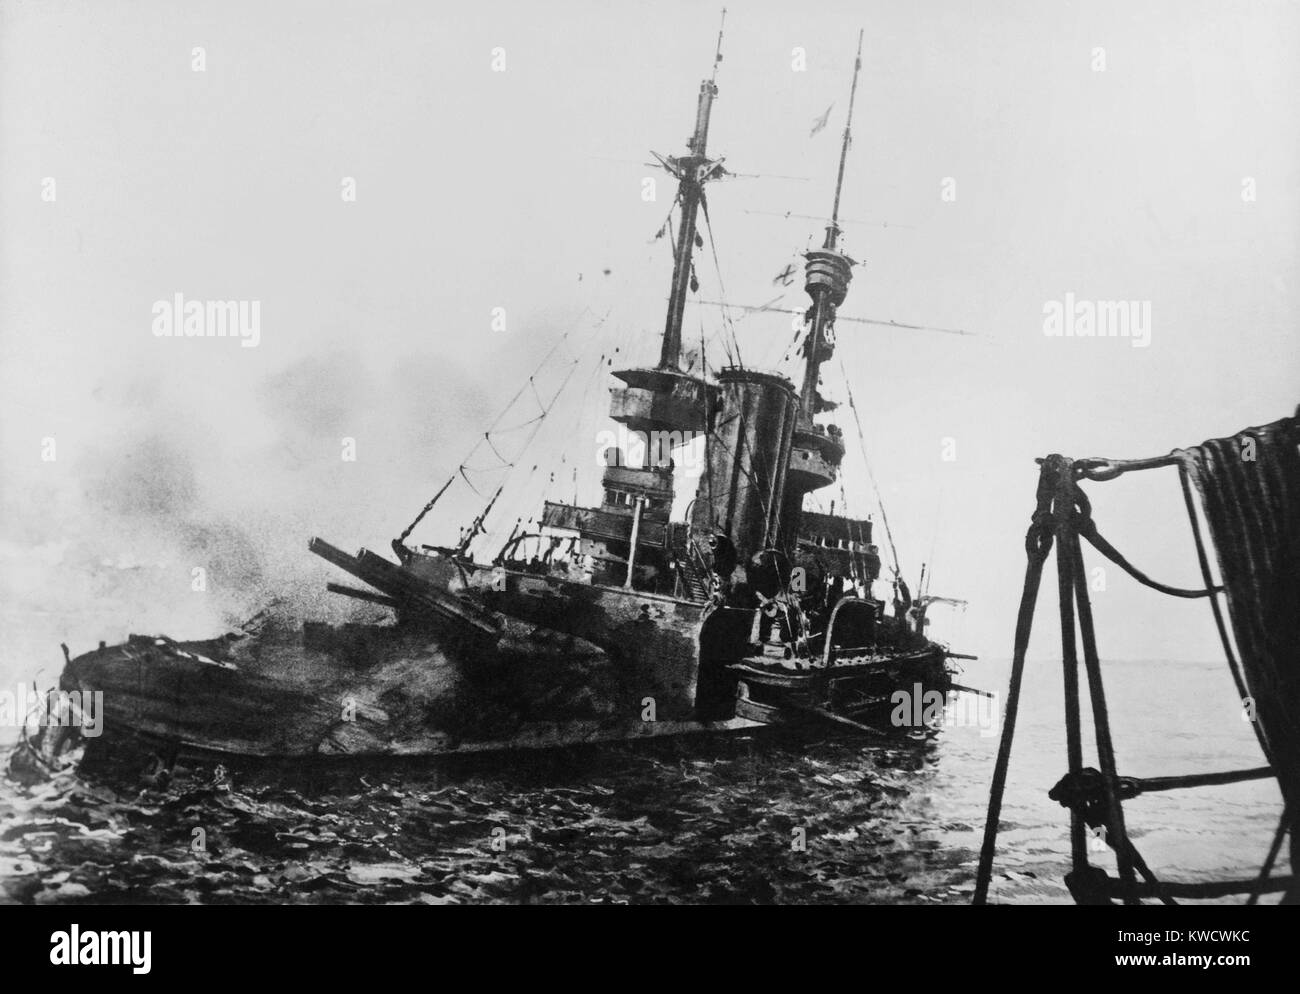 HMS IRRESISTIBLE listing and sinking in the Dardanelles, March 18, 1915. The ship hit a mine while shelling Turkish defenses. Photograph taken from the battleship HMS LORD NELSON (BSLOC 2017 1 153) Stock Photo